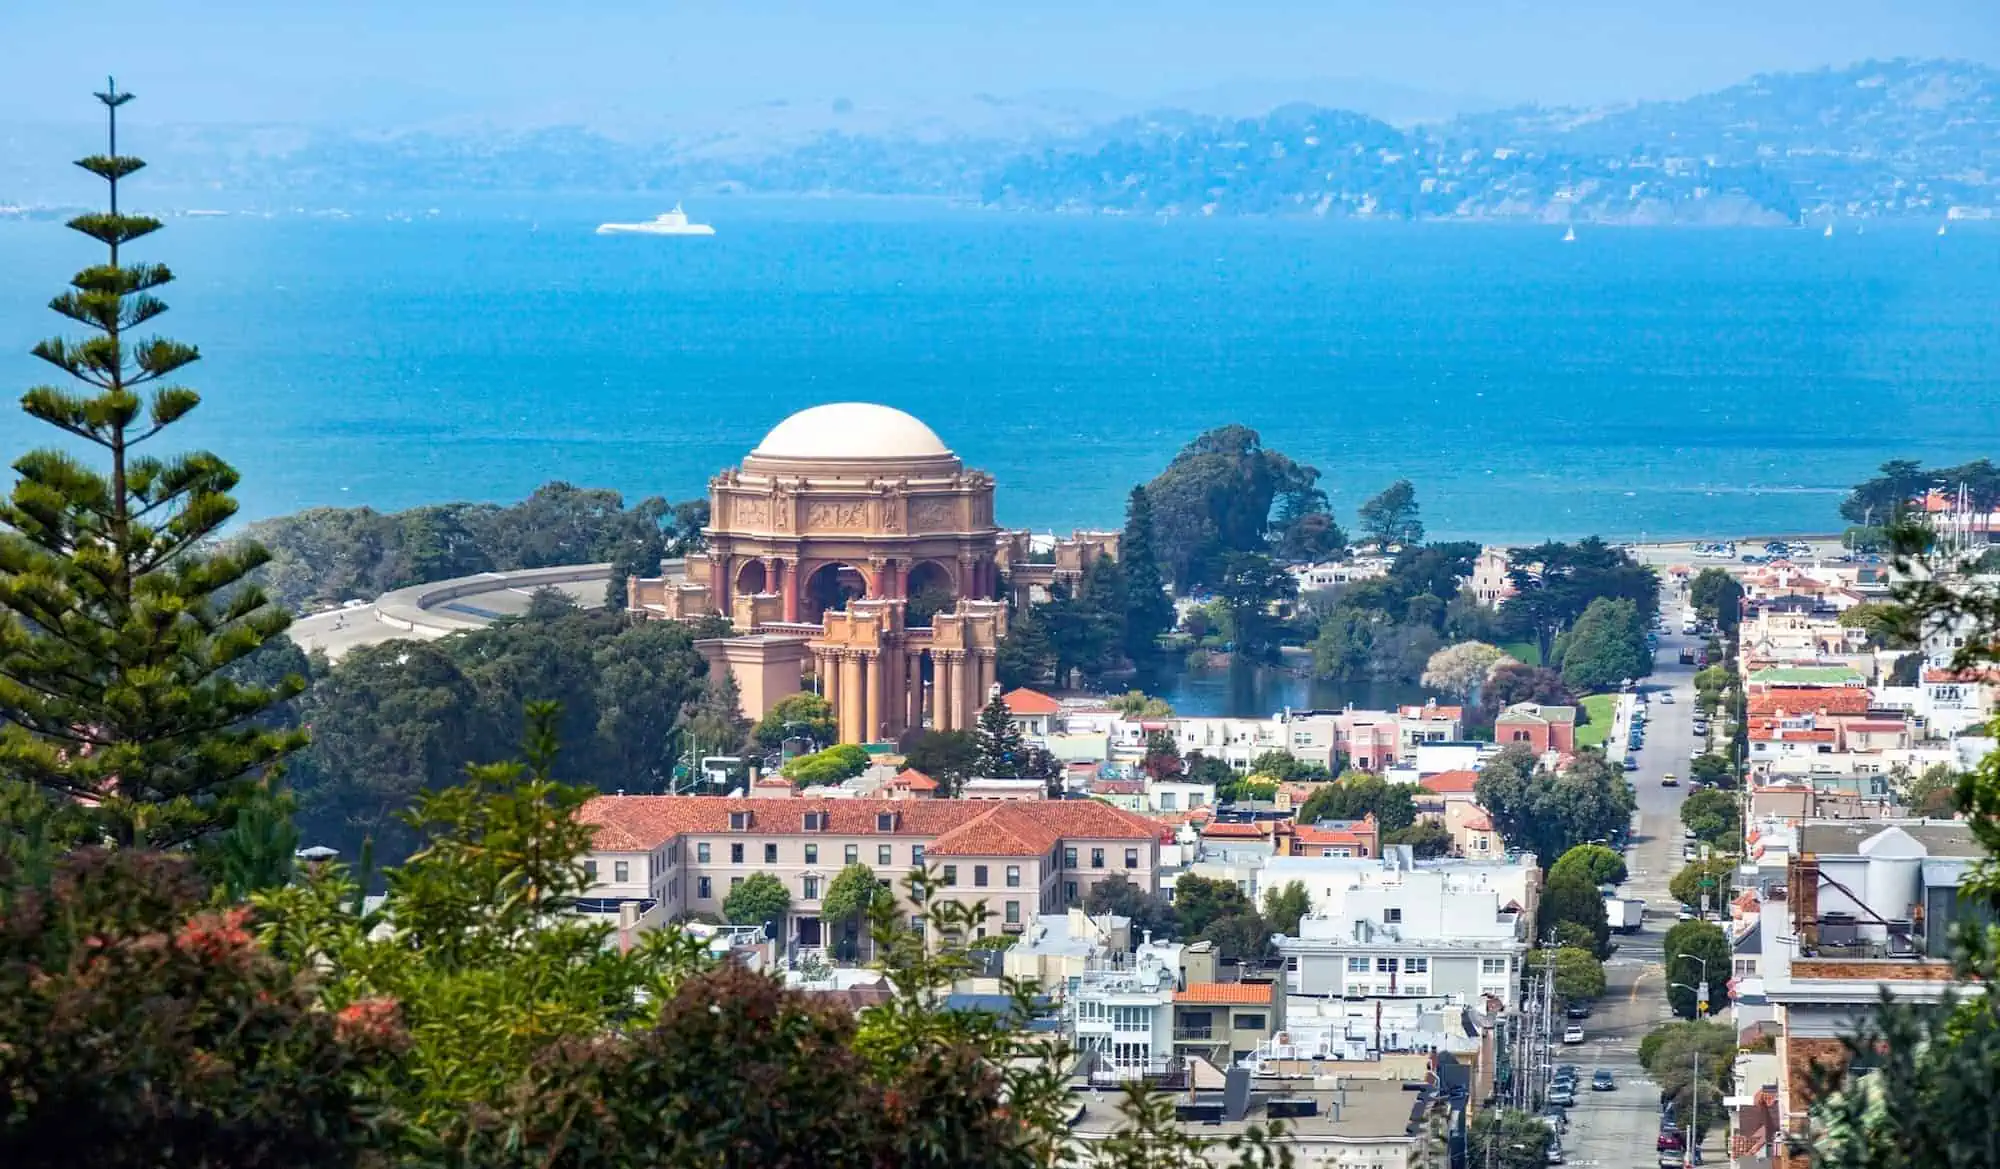 A view of the The Palace of Fine Arts in the Marina neighborhood of San Francisco